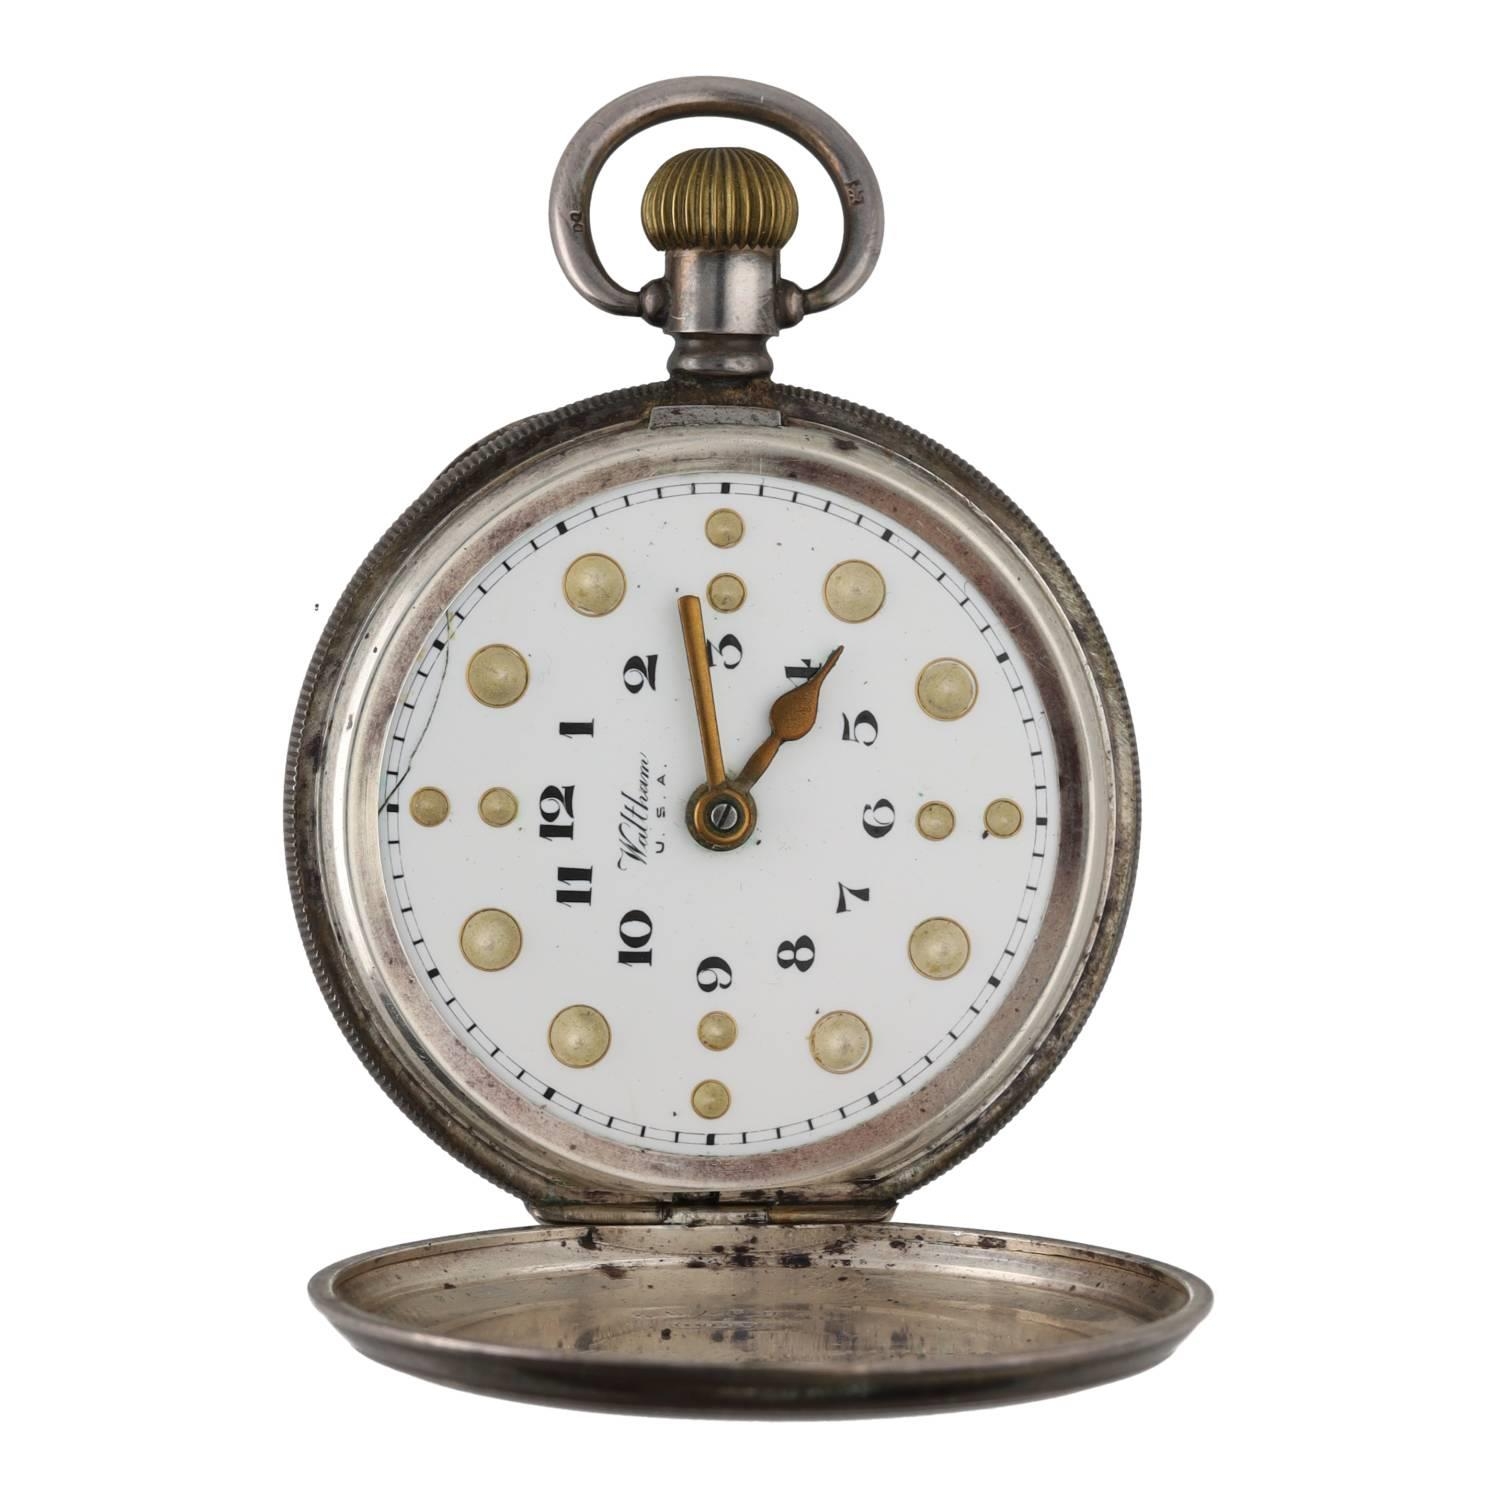 American Waltham 'Braille' silver lever hunter pocket watch, circa 1917, serial no. 21608887, signed - Image 2 of 5